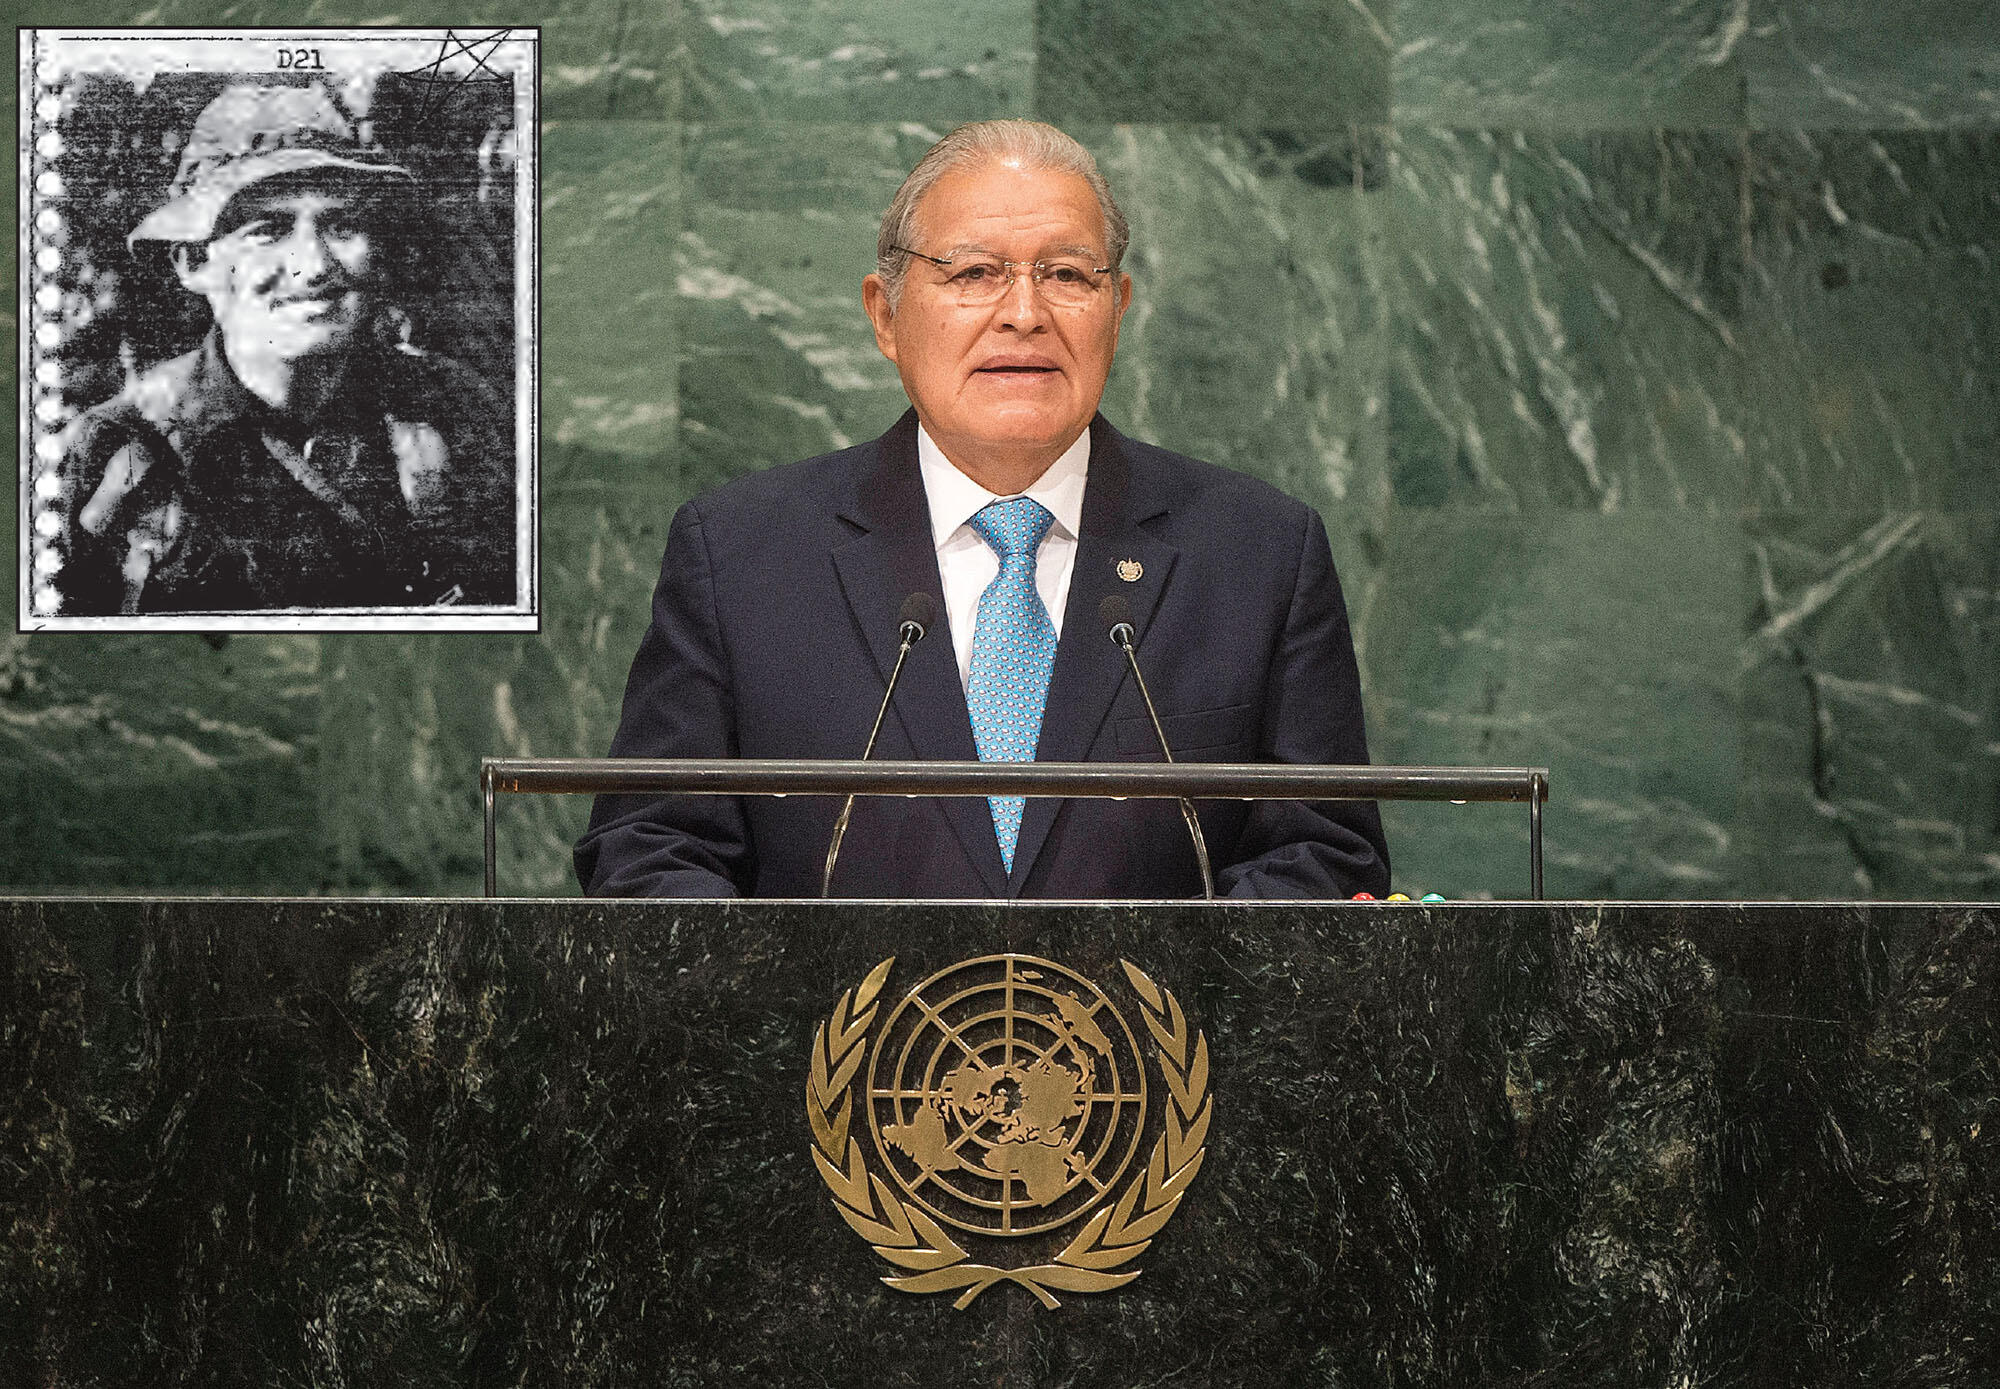 Two photos of Salvador Sánchez Cerén, as the current president of El Salvador speaking from the dais at the United Nations and (inset) in the Yellow Book. (Photo courtesy of Presidencia de El Salvador and inset courtesy of Angelina Snodgrass Godoy.)